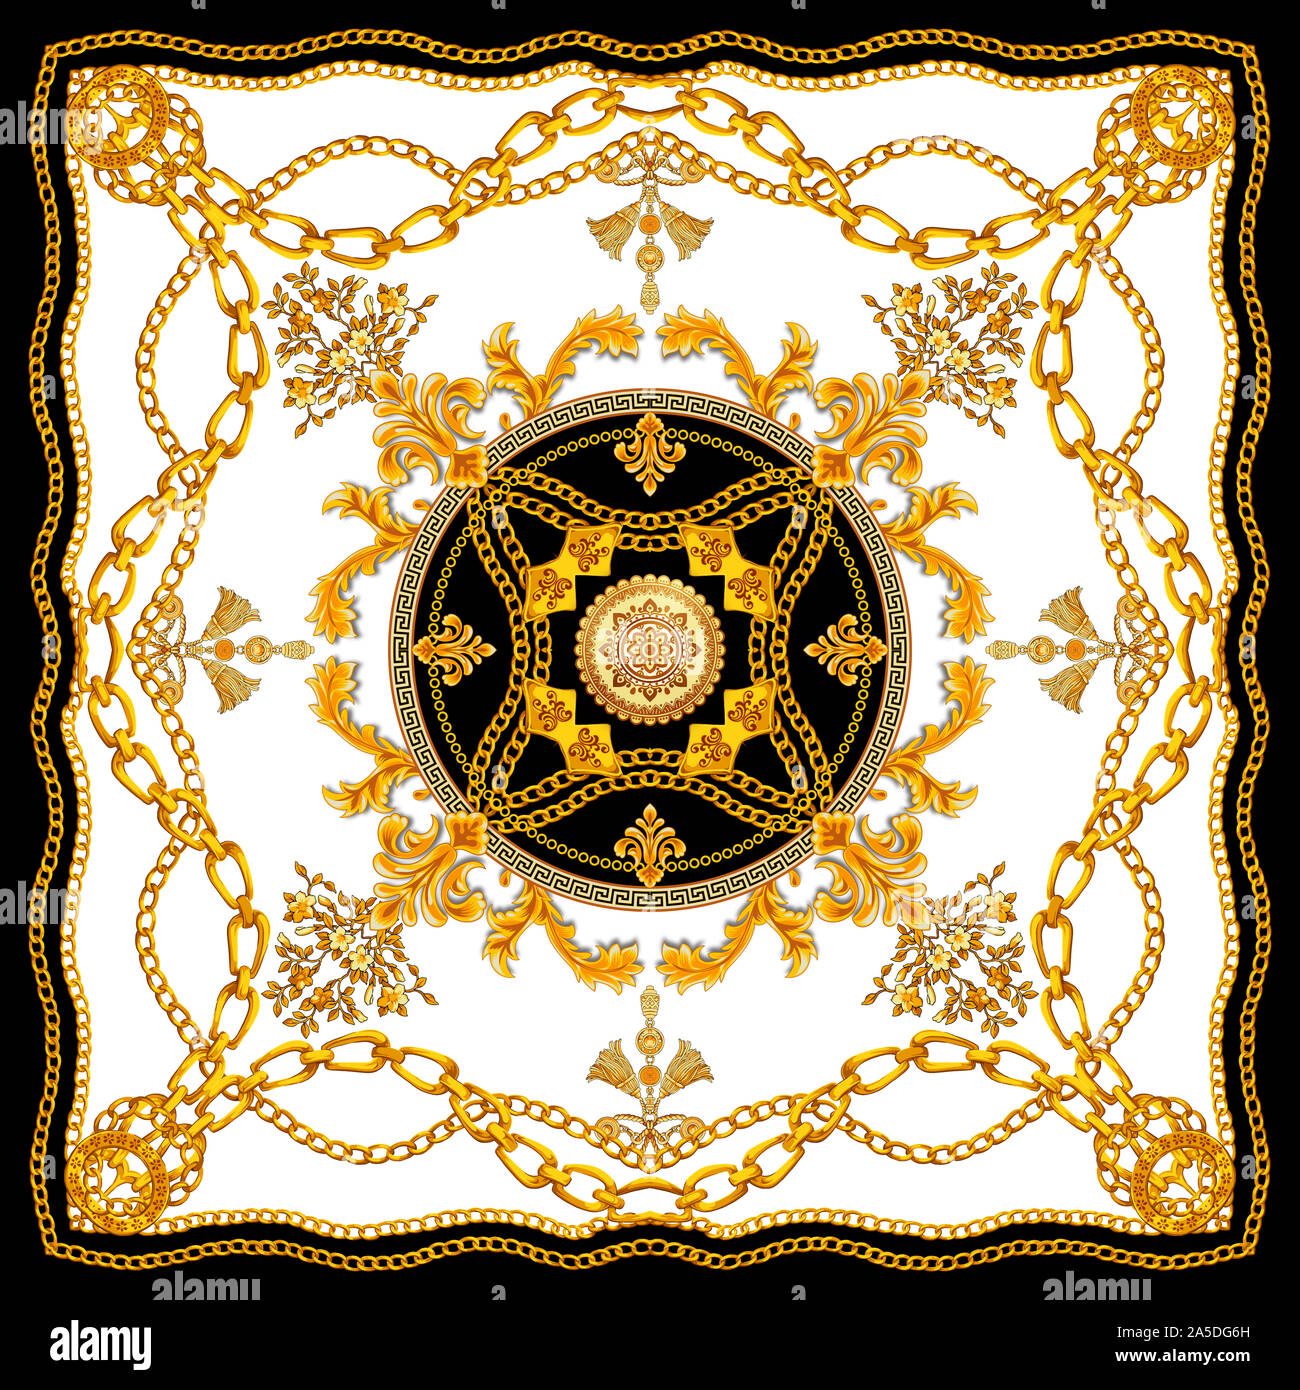 https://c8.alamy.com/comp/2A5DG6H/baroque-silk-shawl-textile-print-scarf-design-for-silk-print-vintage-style-pattern-ready-for-textile-square-fashion-print-versace-style-black-and-2A5DG6H.jpg